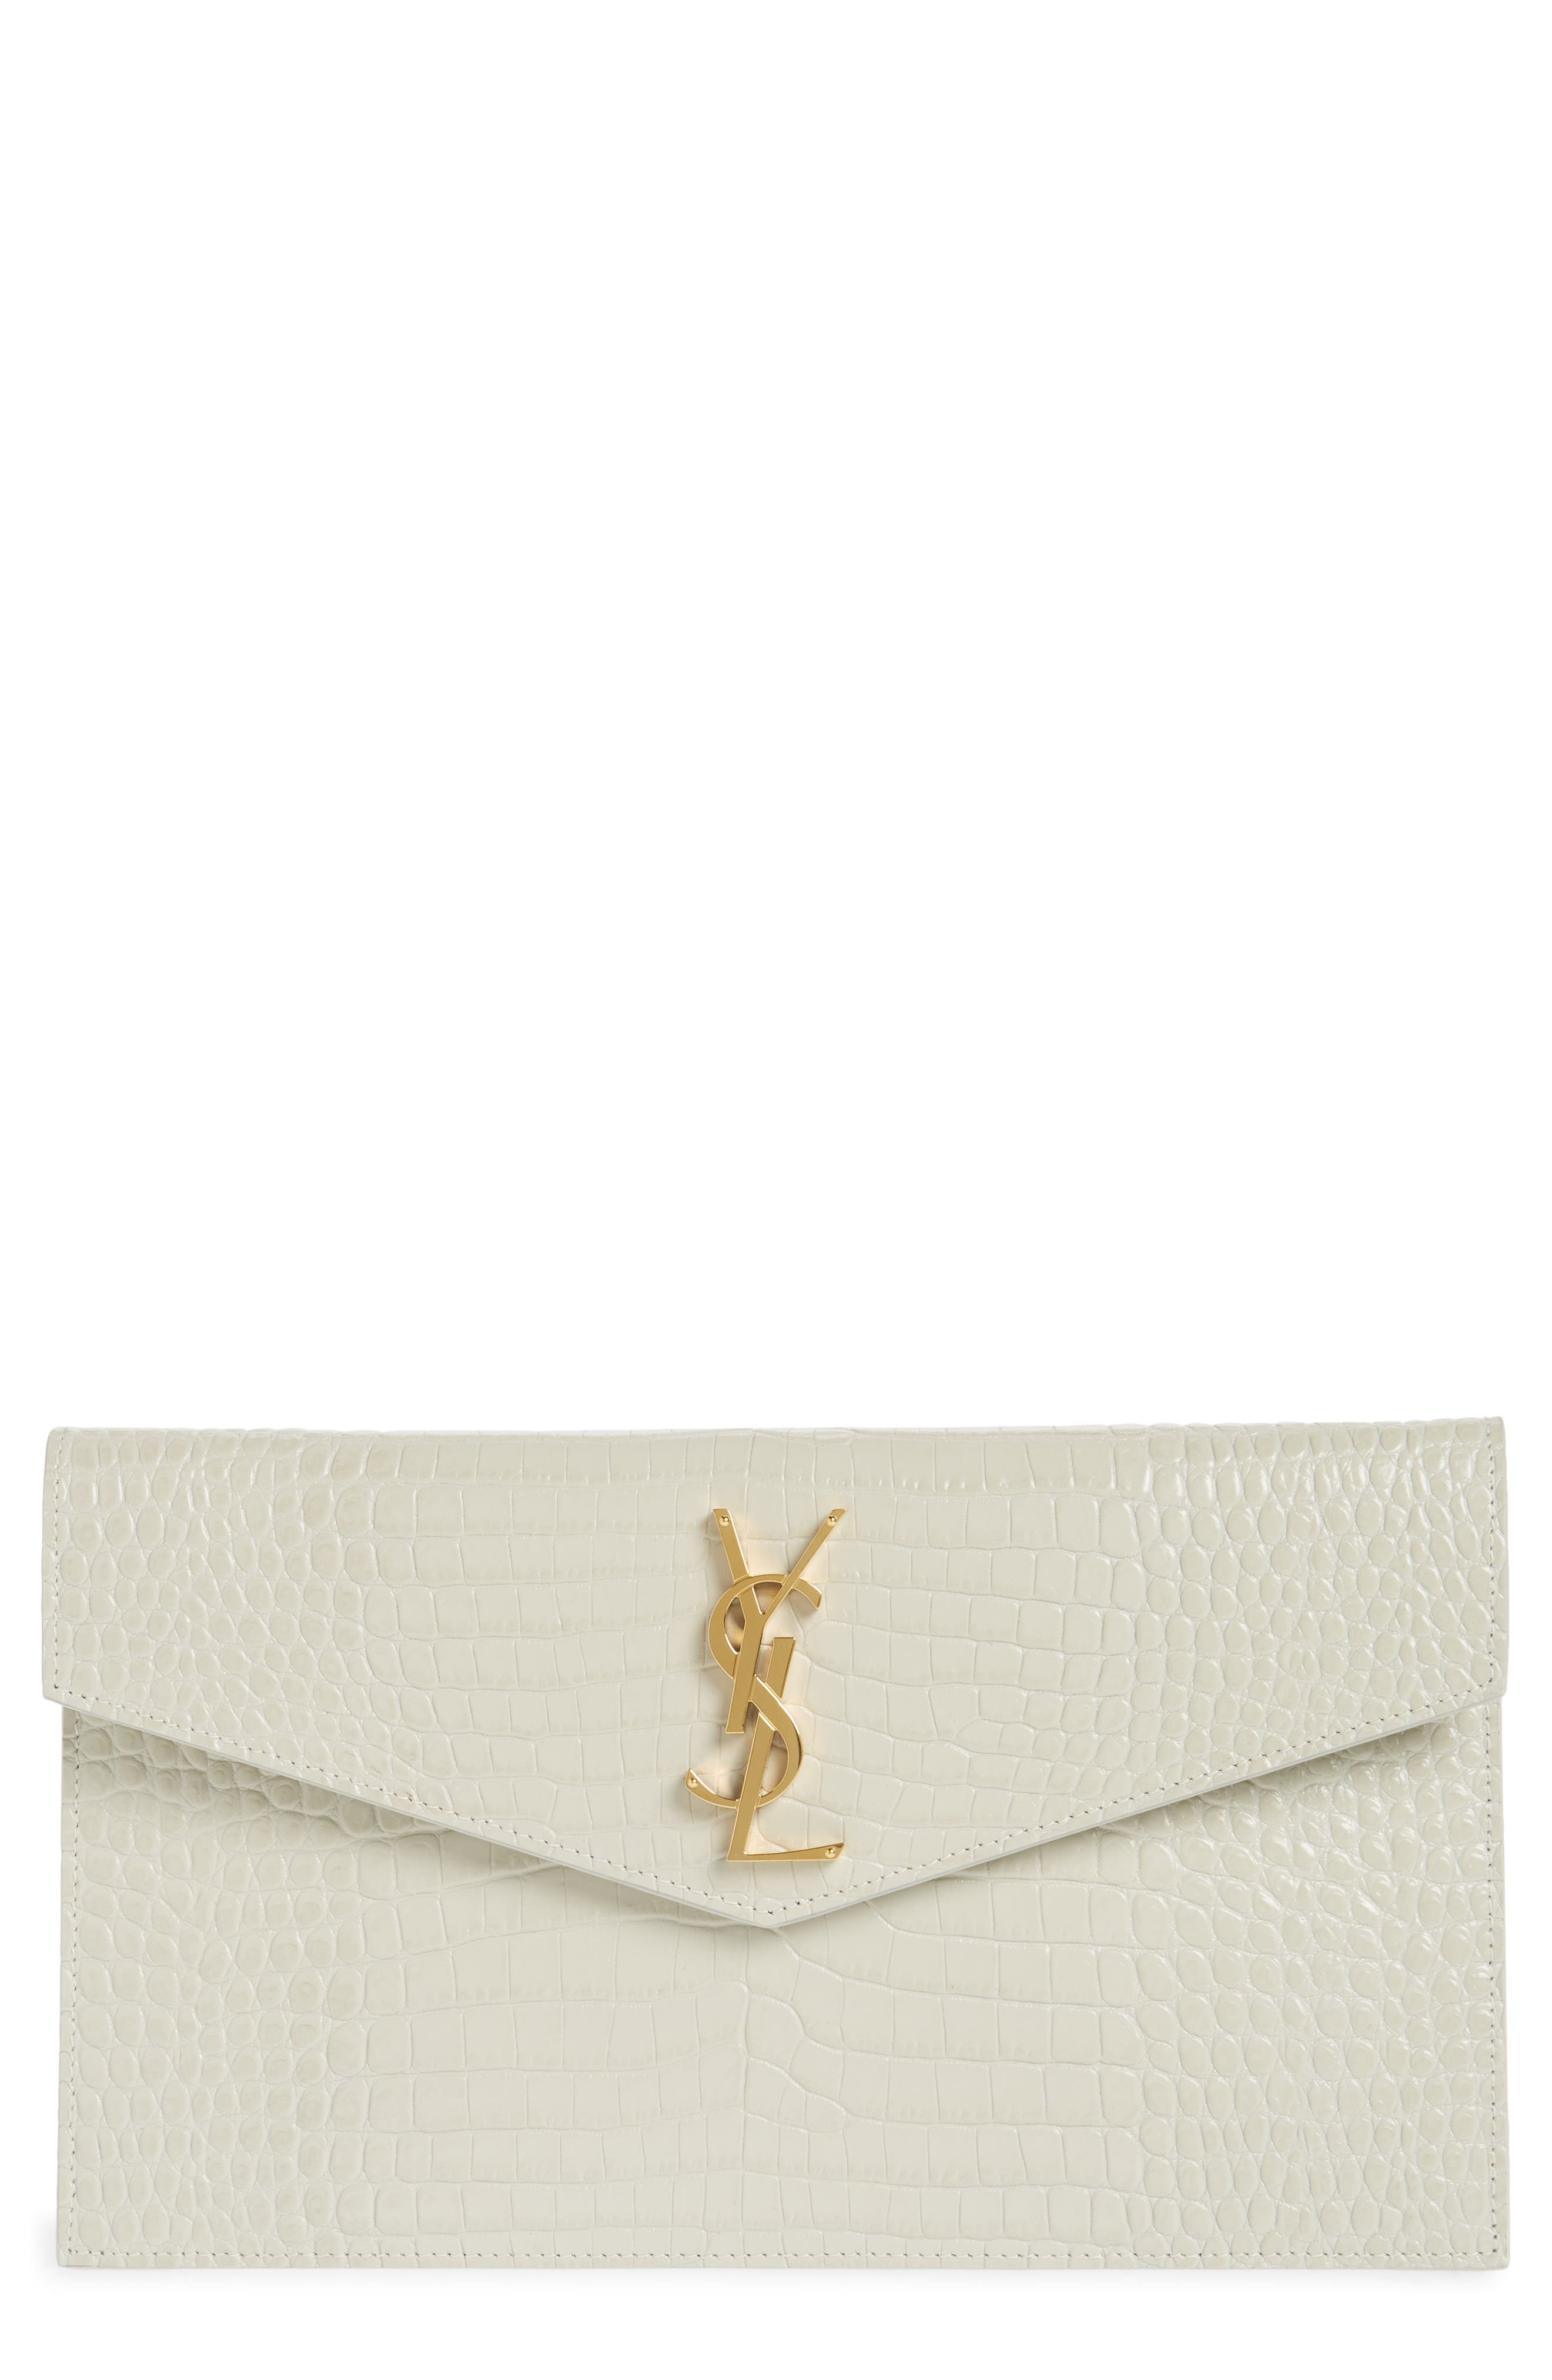 Saint Laurent Uptown Croc Embossed Leather Pouch in Crema Soft at Nordstrom